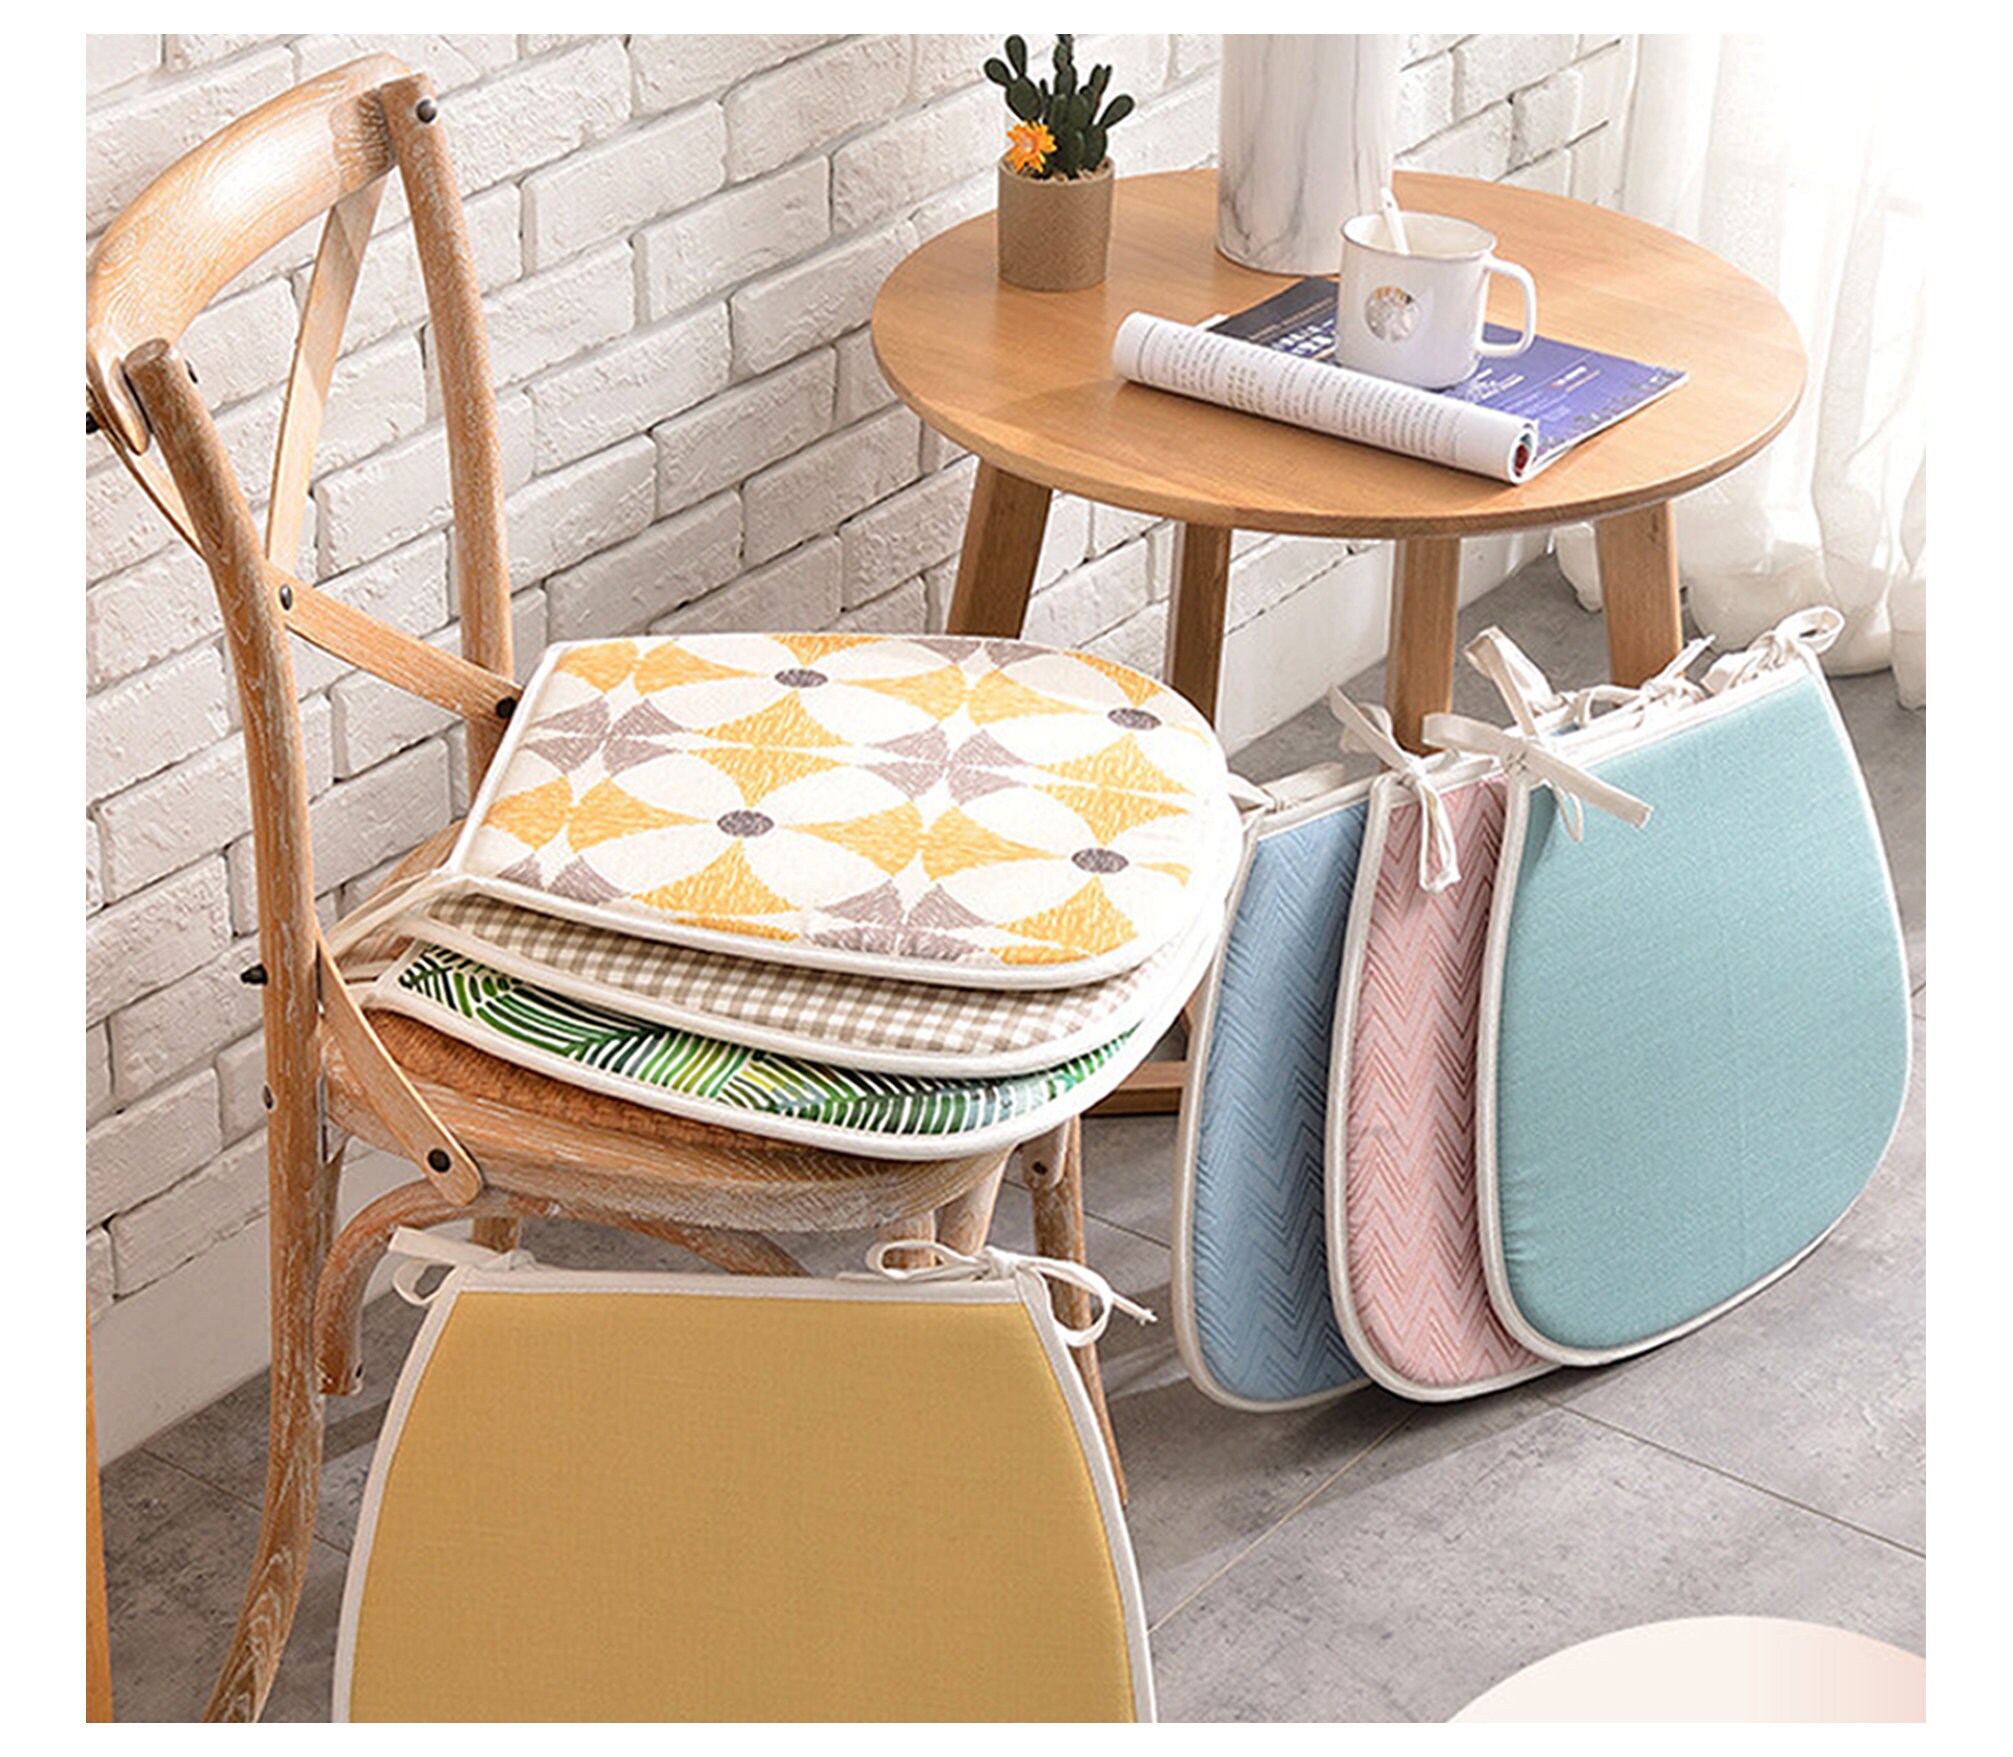 Chair Cushions Kitchen Dine Chair Pad With Ties Dining Room Etsy